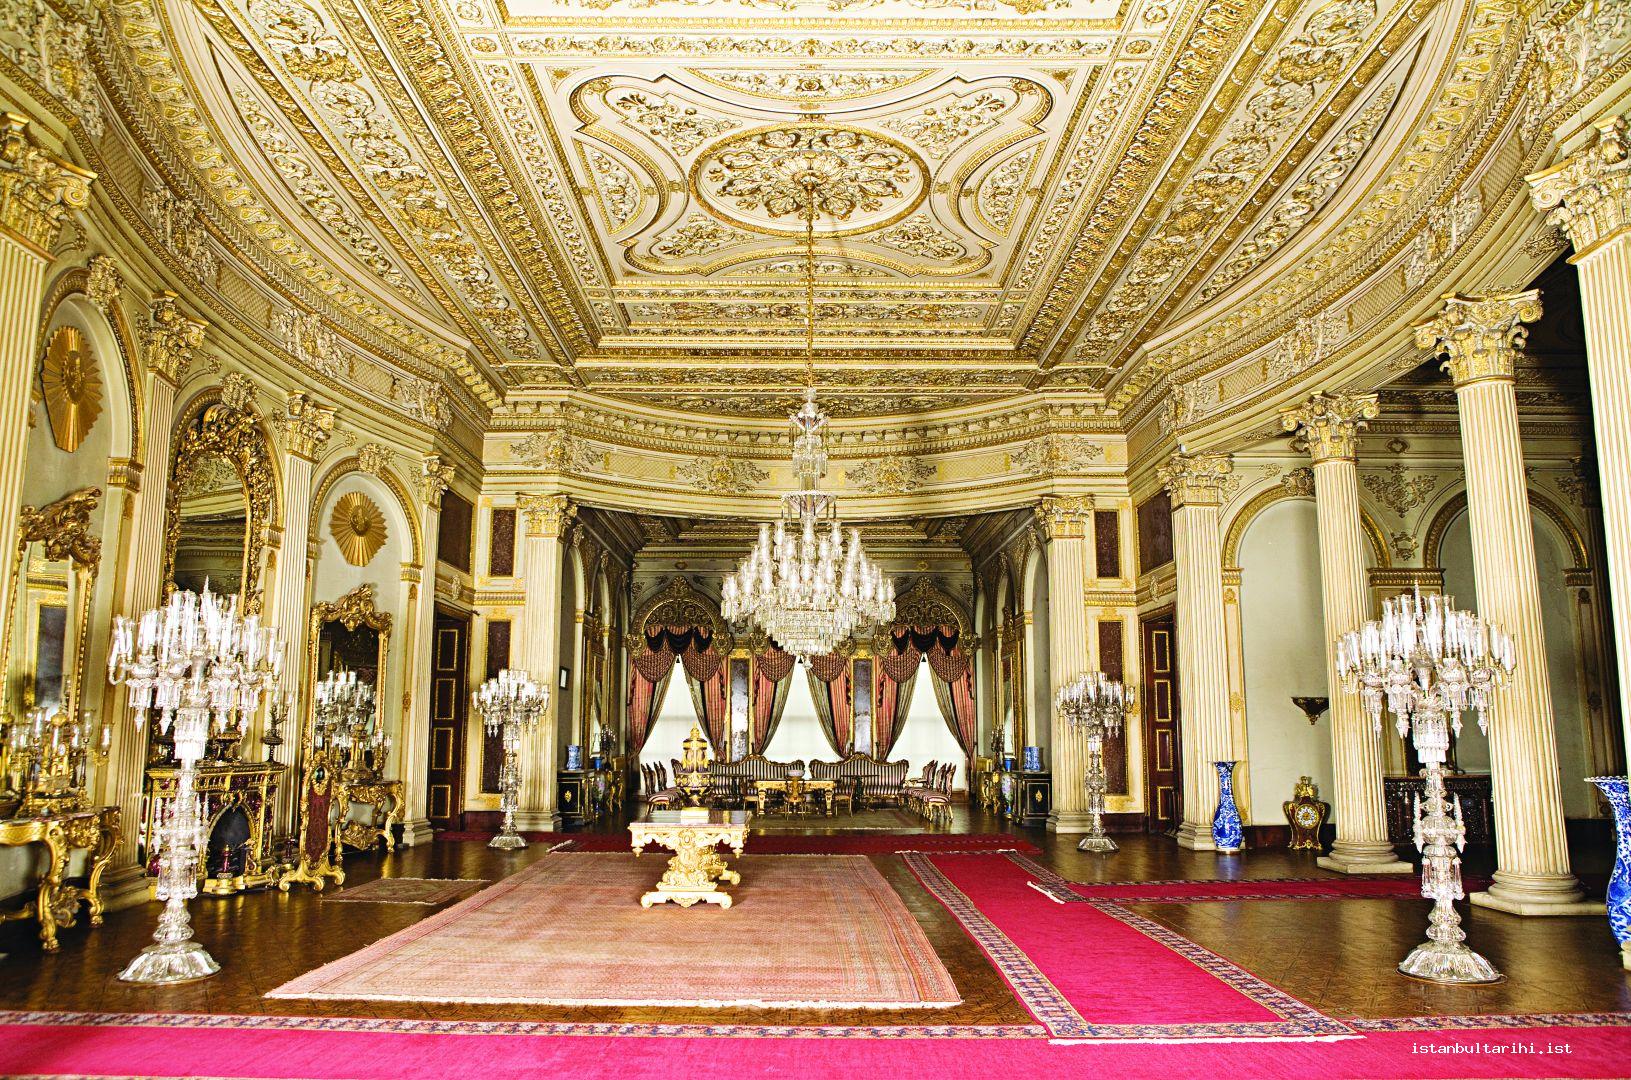 6- Muayede Hall (the hall for exchanging festival greetings) in Dolmabahçe Palace    